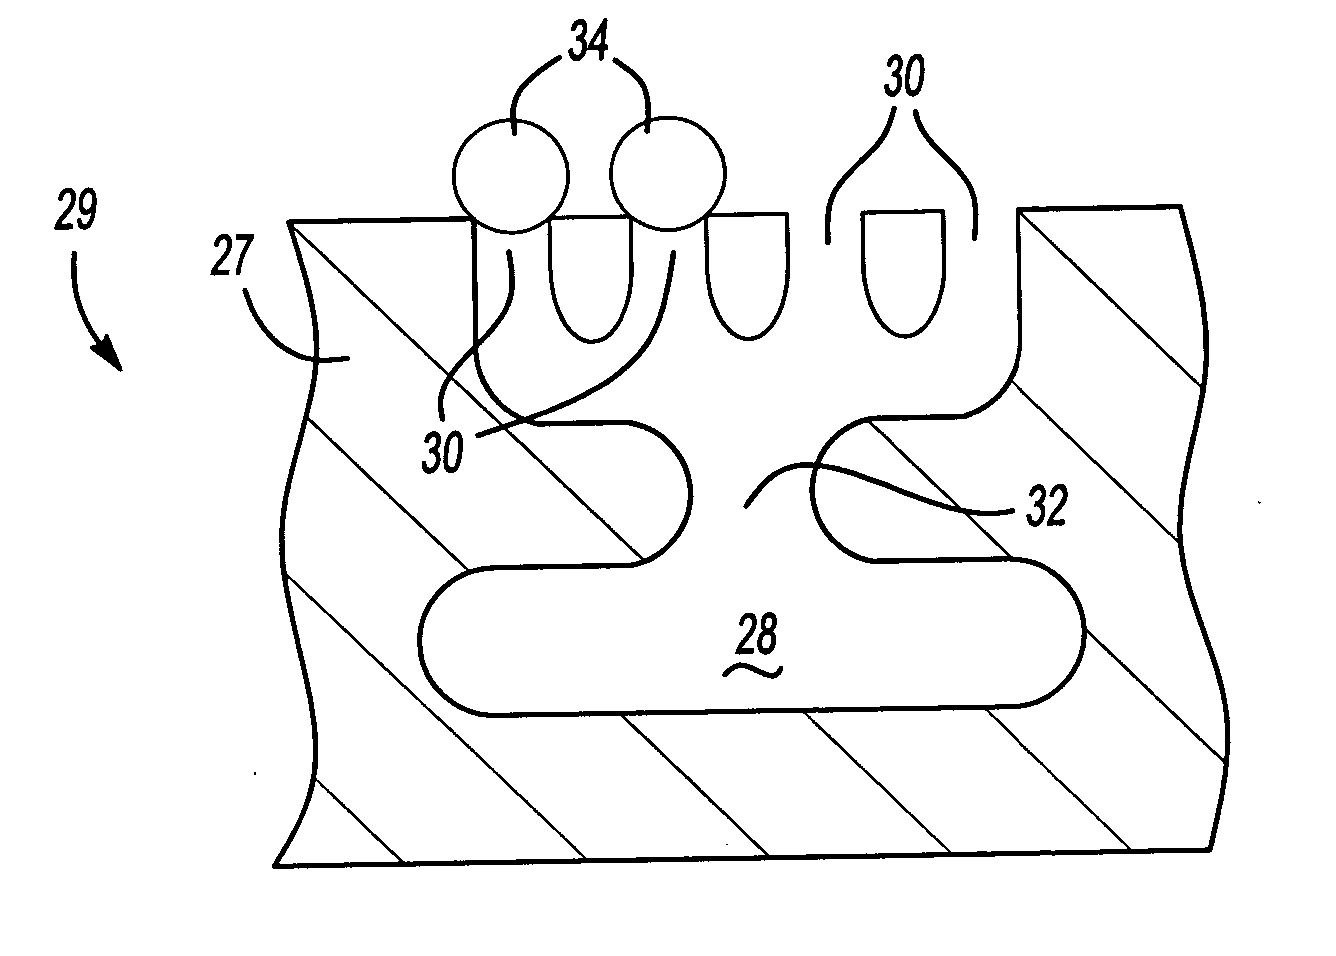 Debris-filtering technique for gas turbine engine component air cooling system